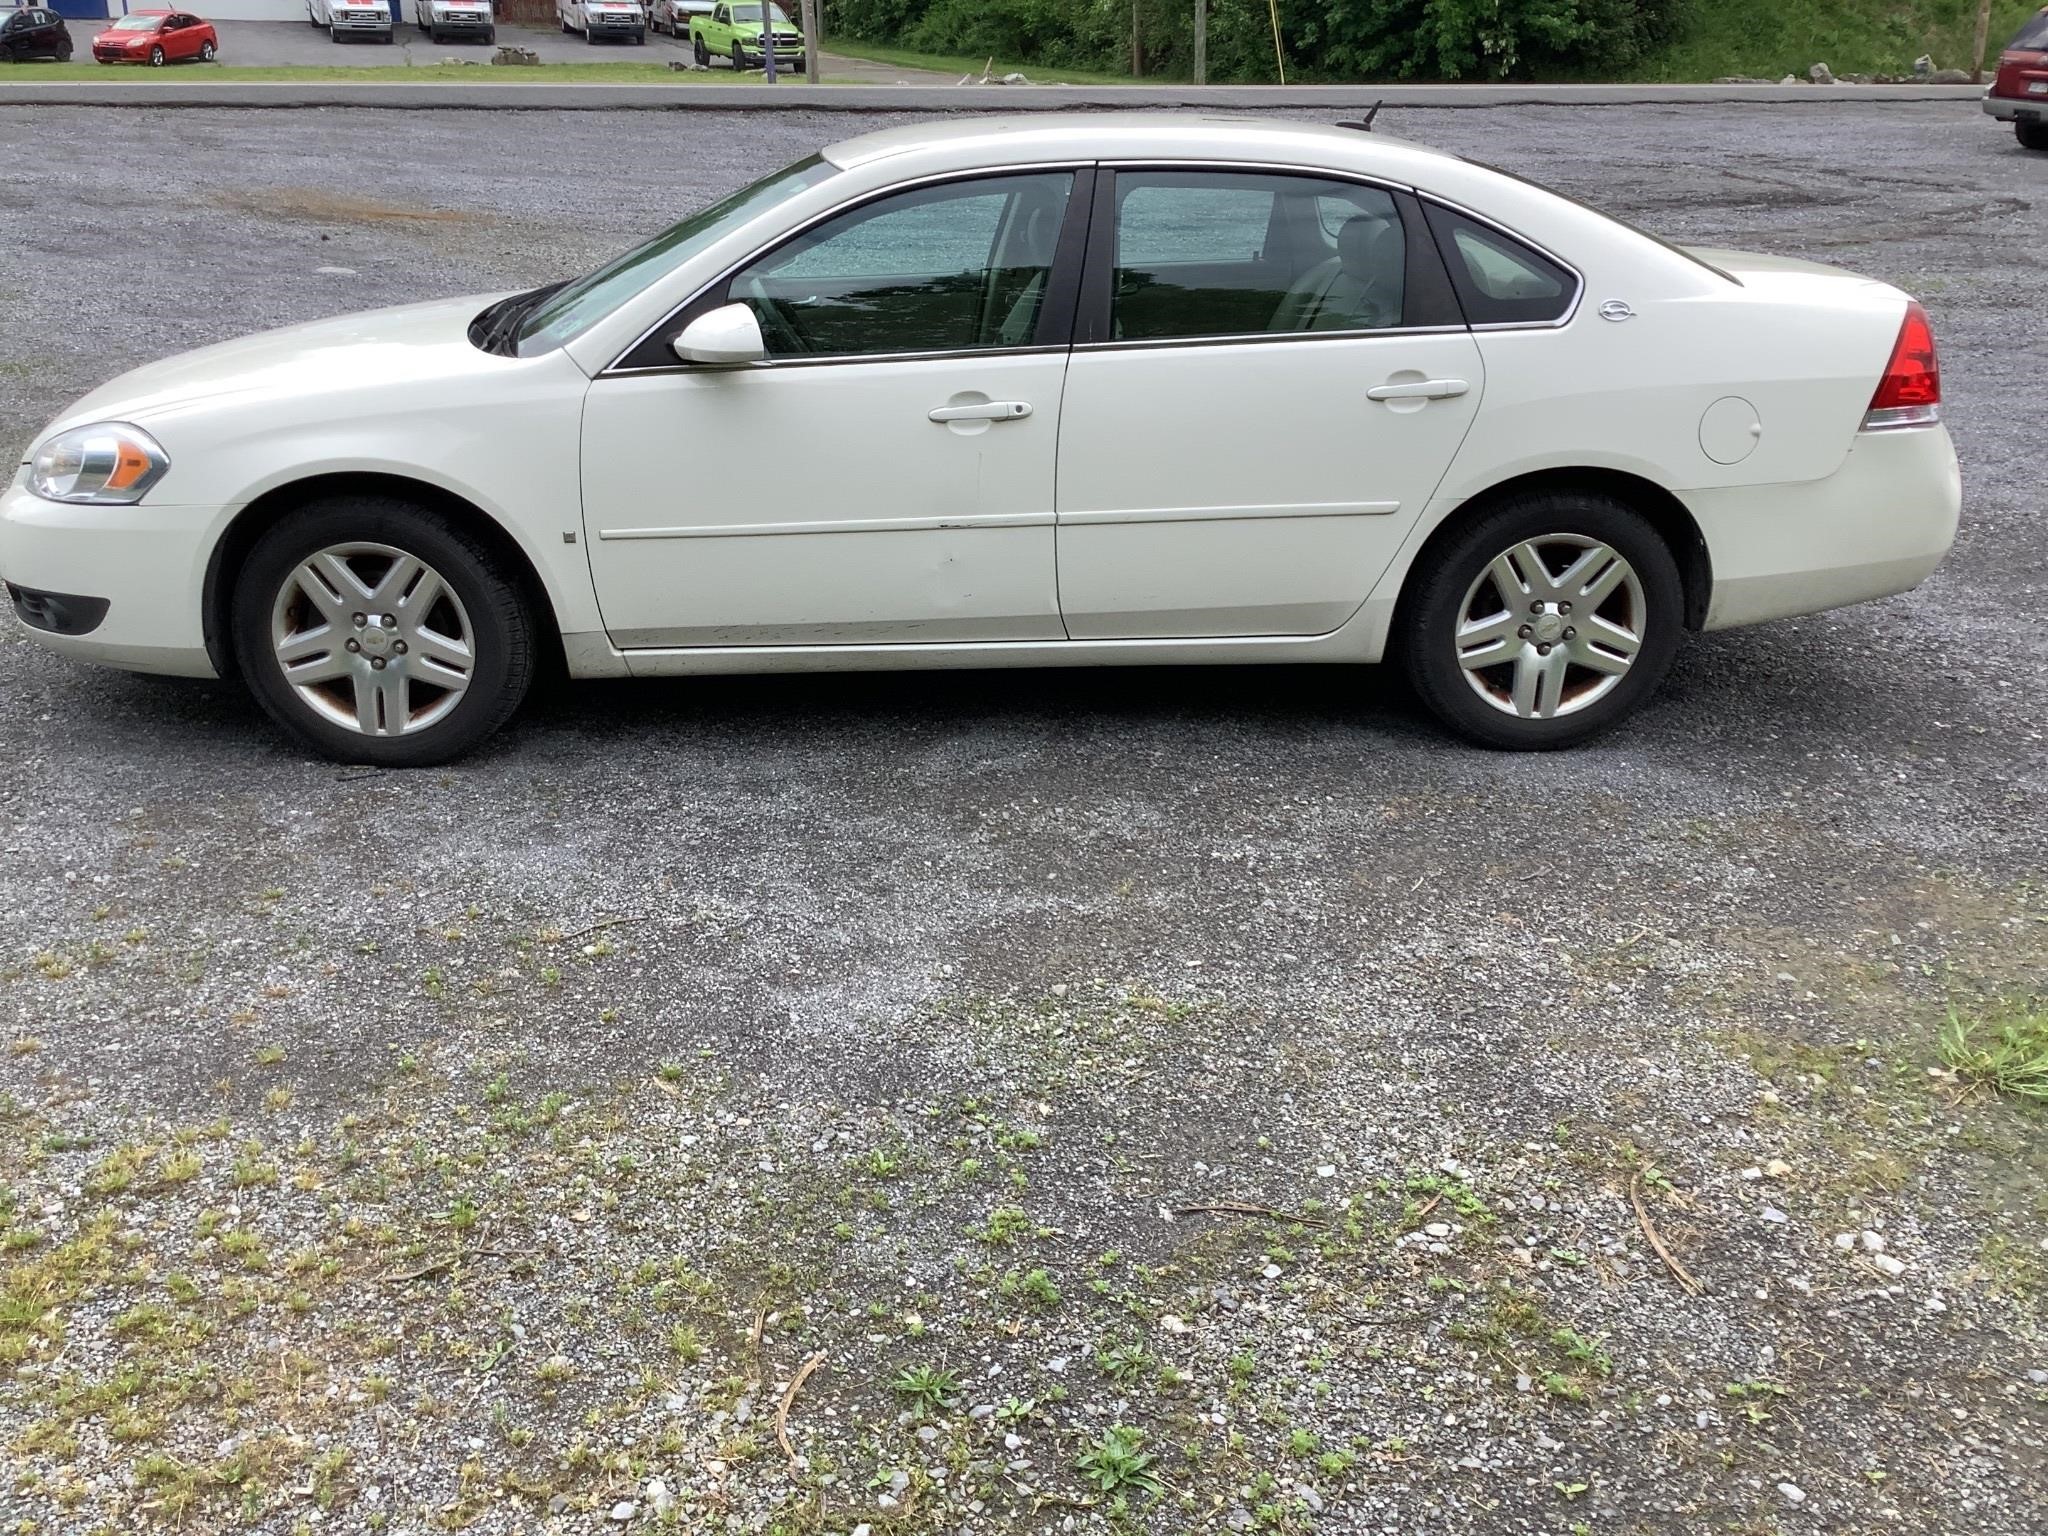 2009 Chevrolet Impala V6 with Title